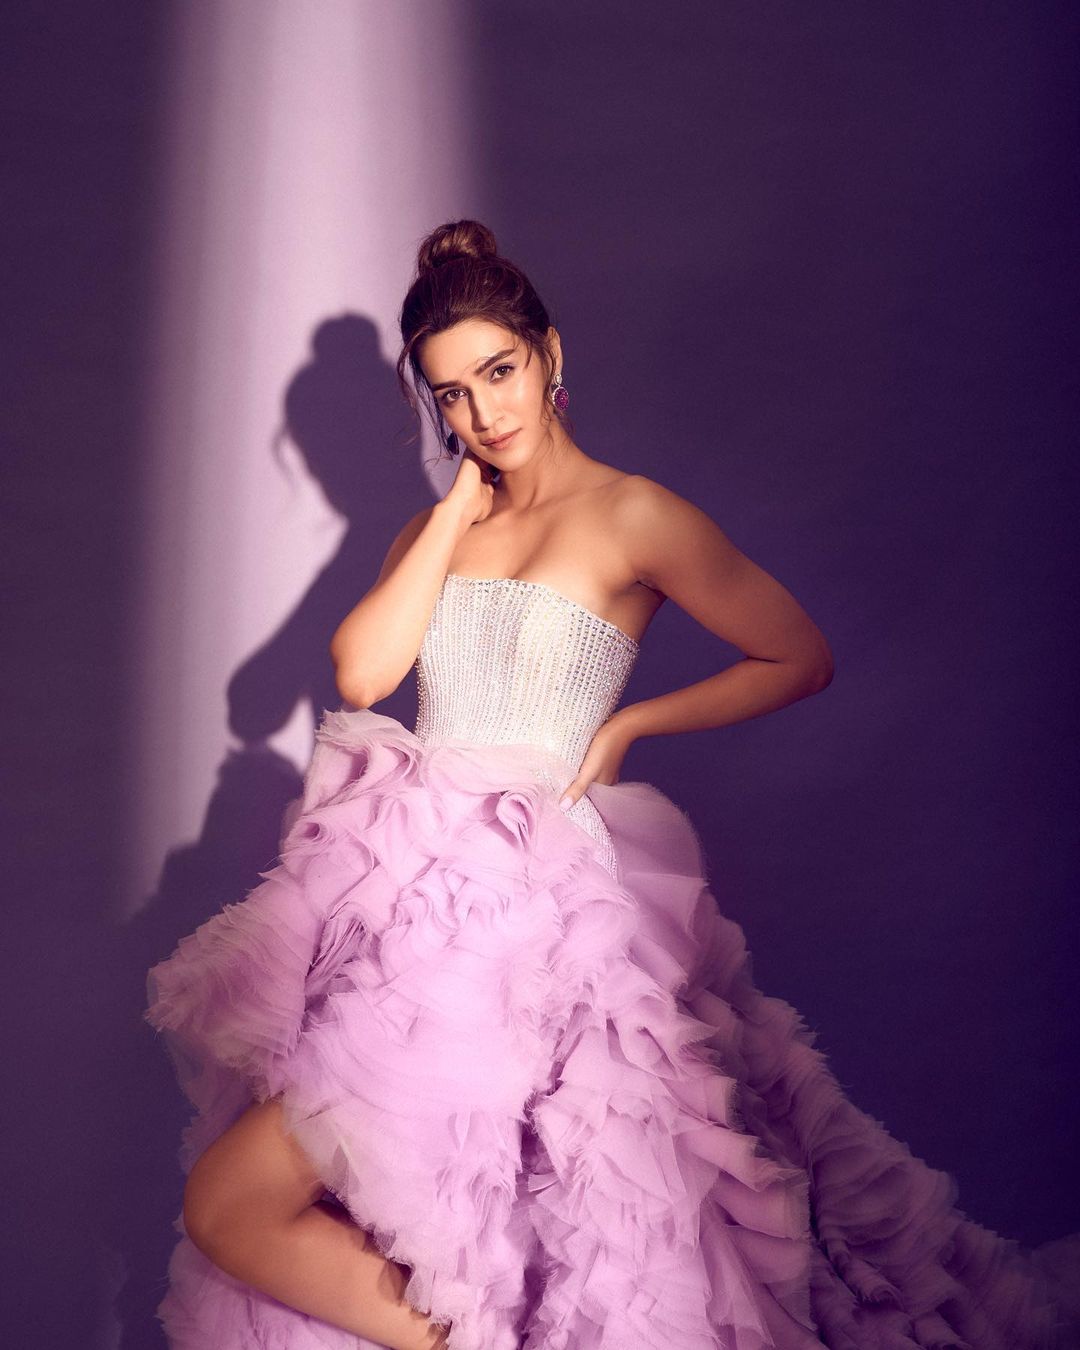 Kriti Sanon compliments the gown with an elegant updo